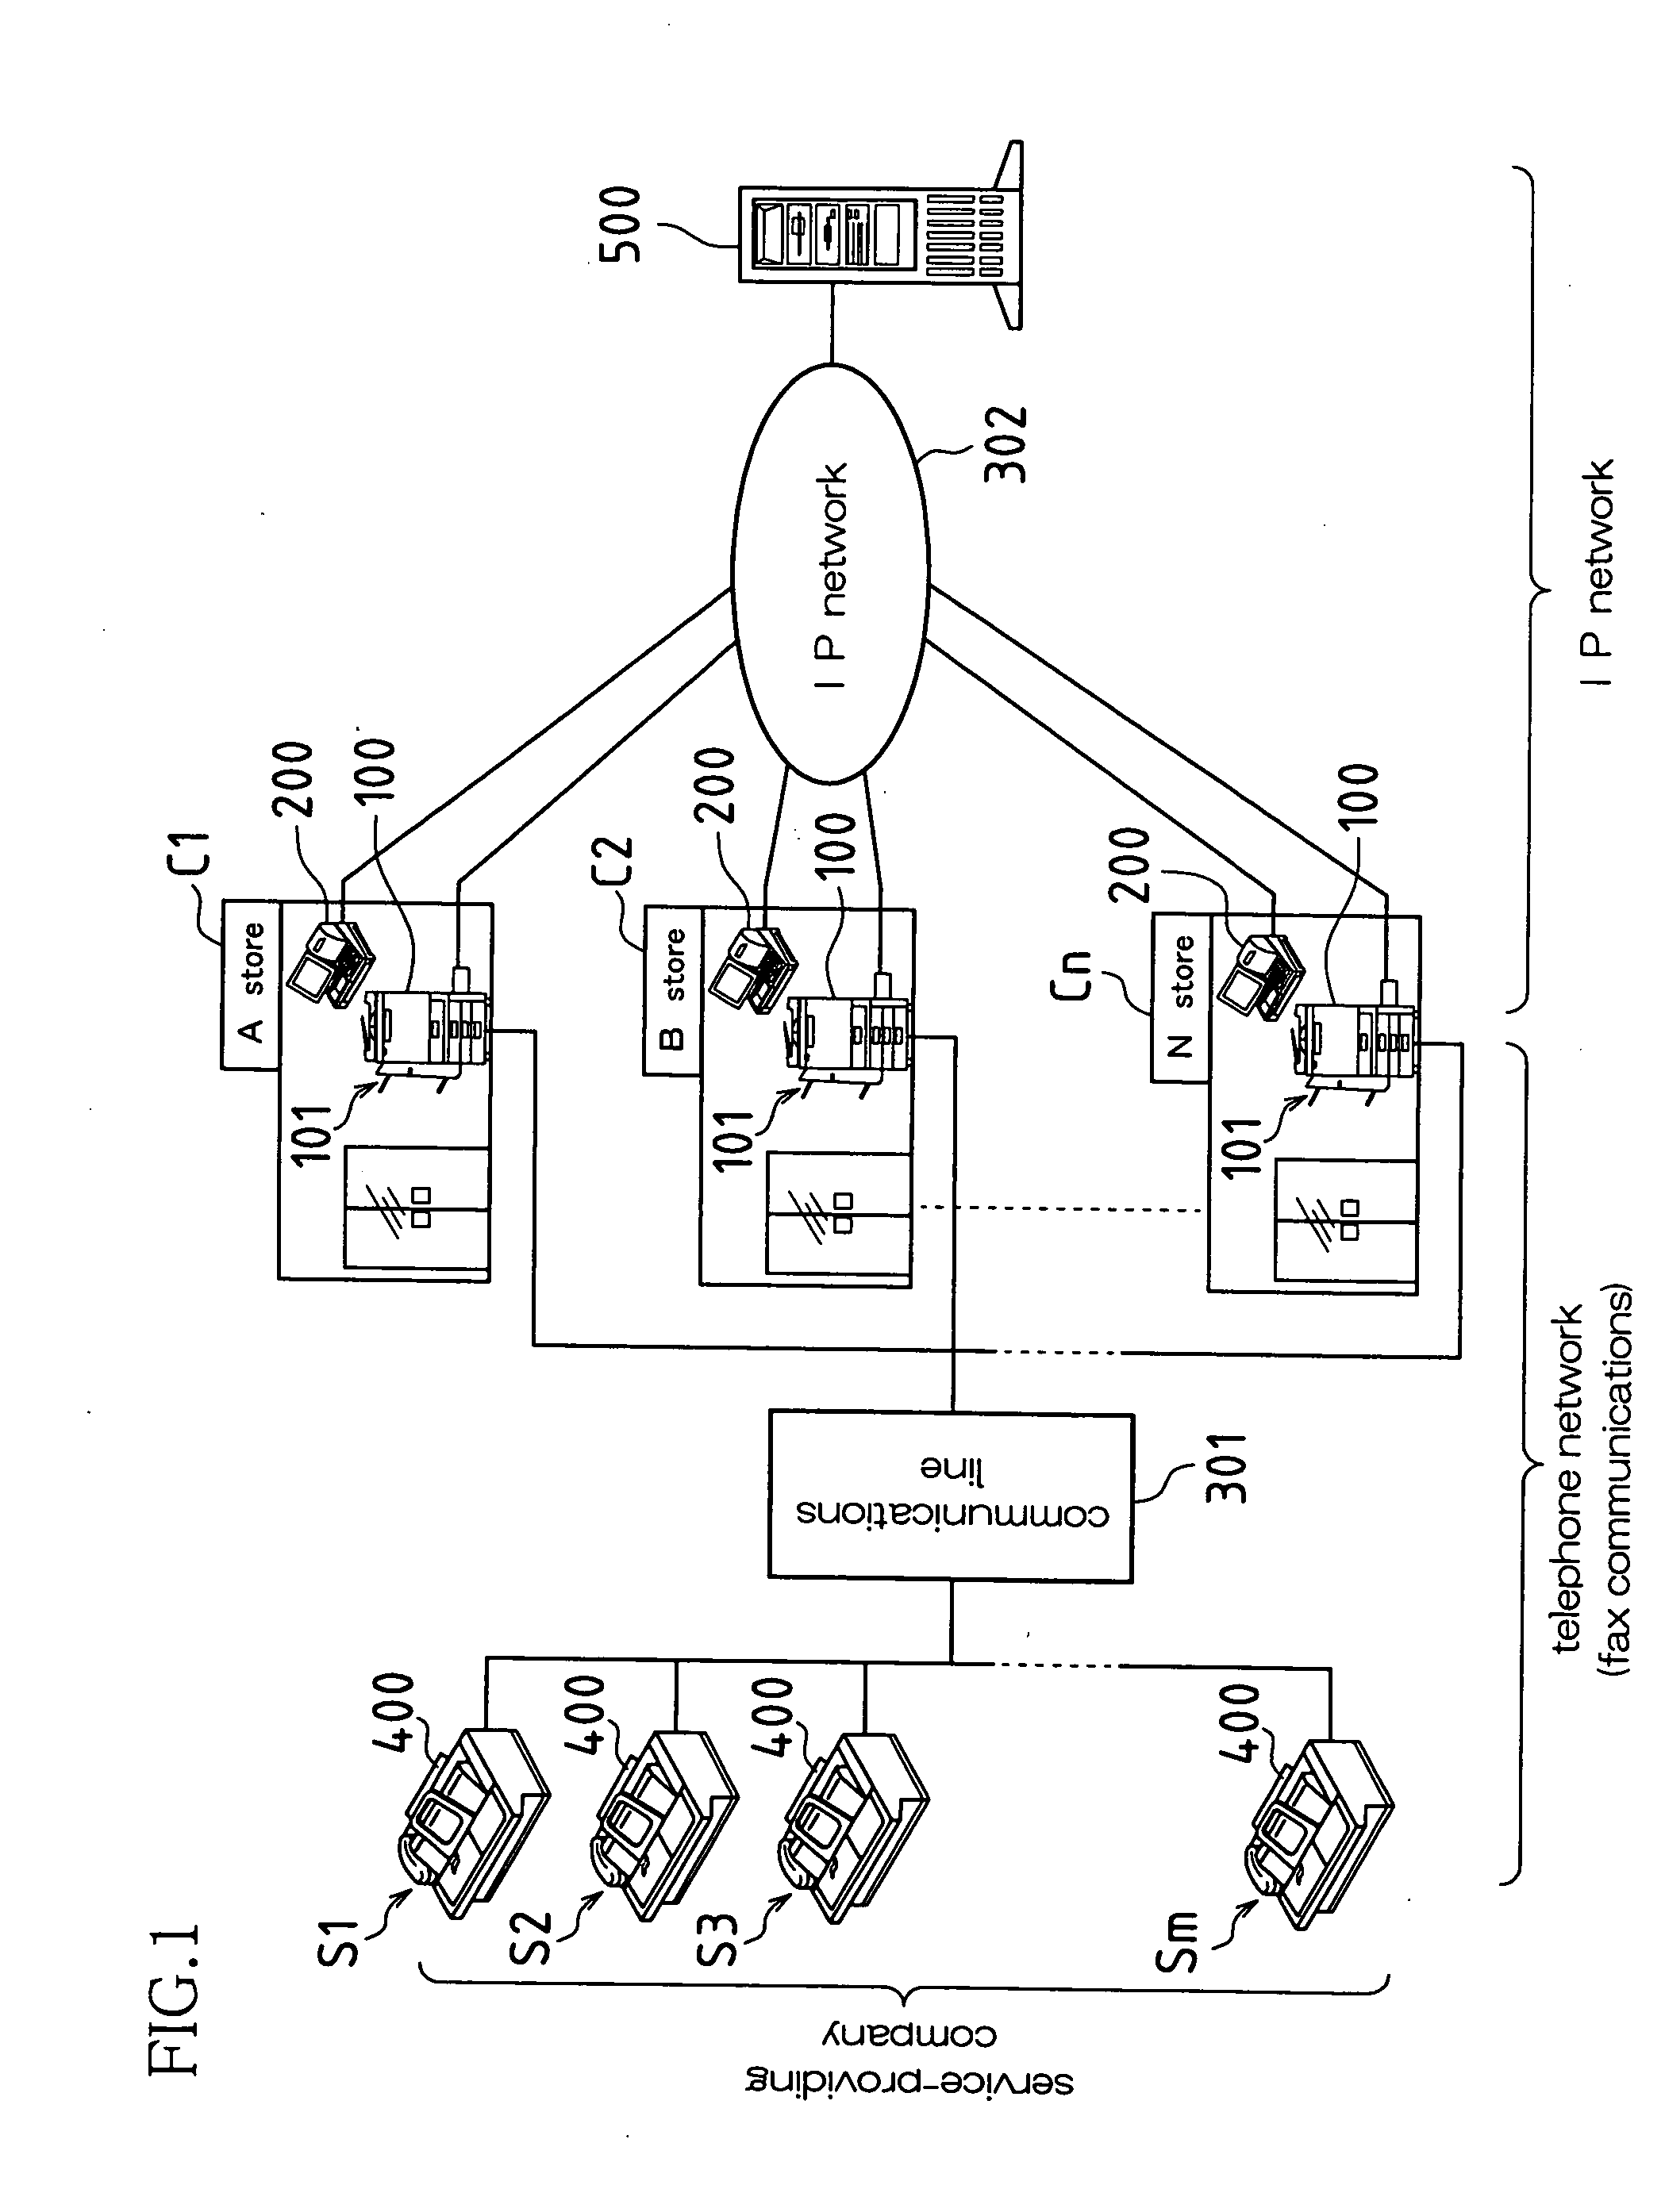 Product ordering apparatus